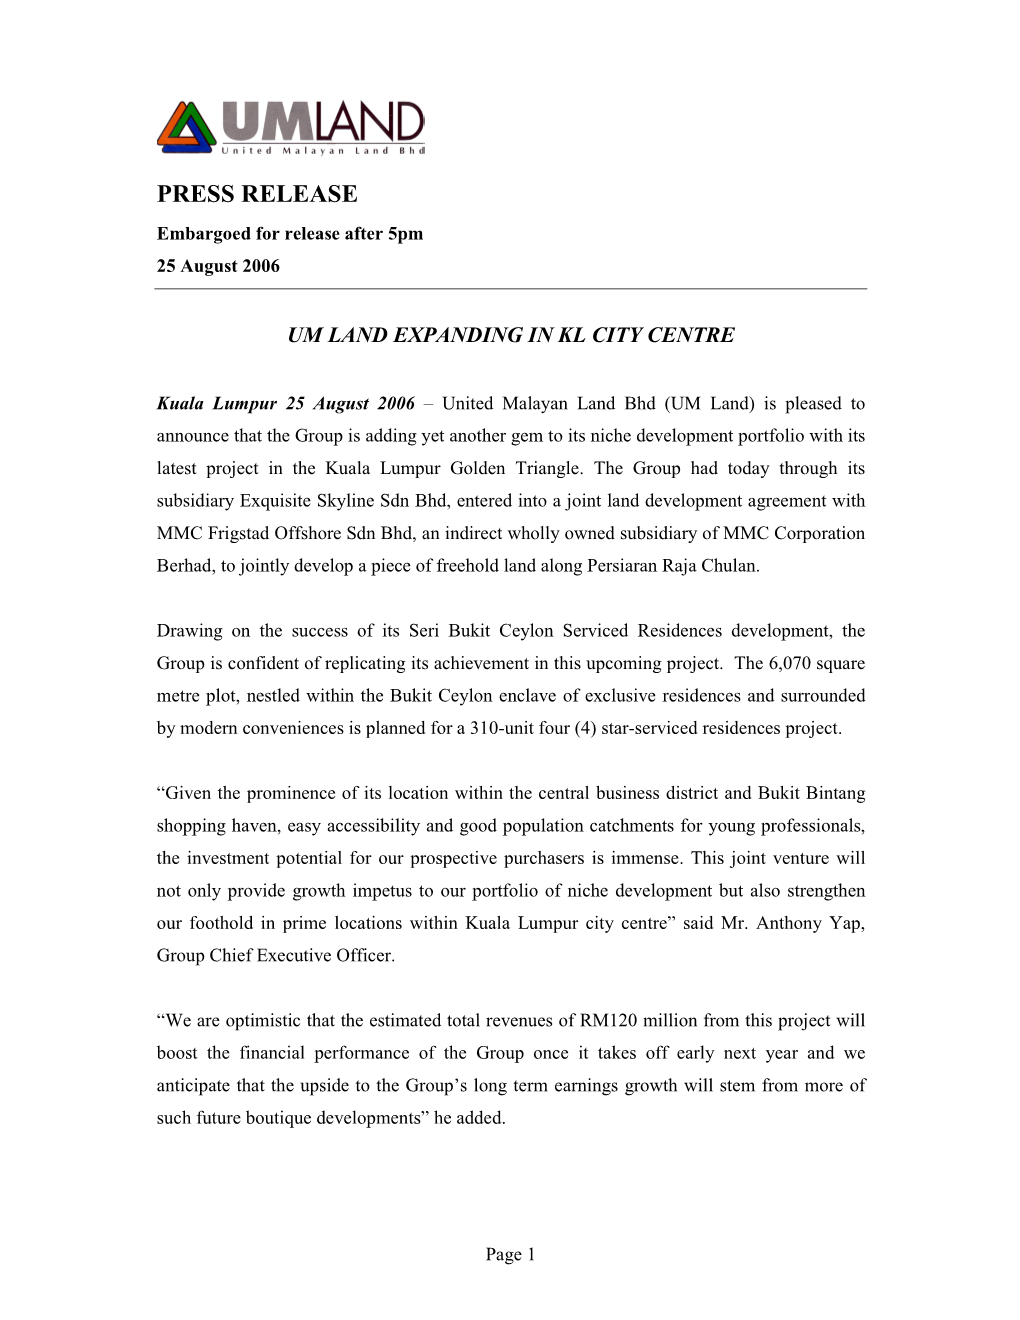 PRESS RELEASE Embargoed for Release After 5Pm 25 August 2006